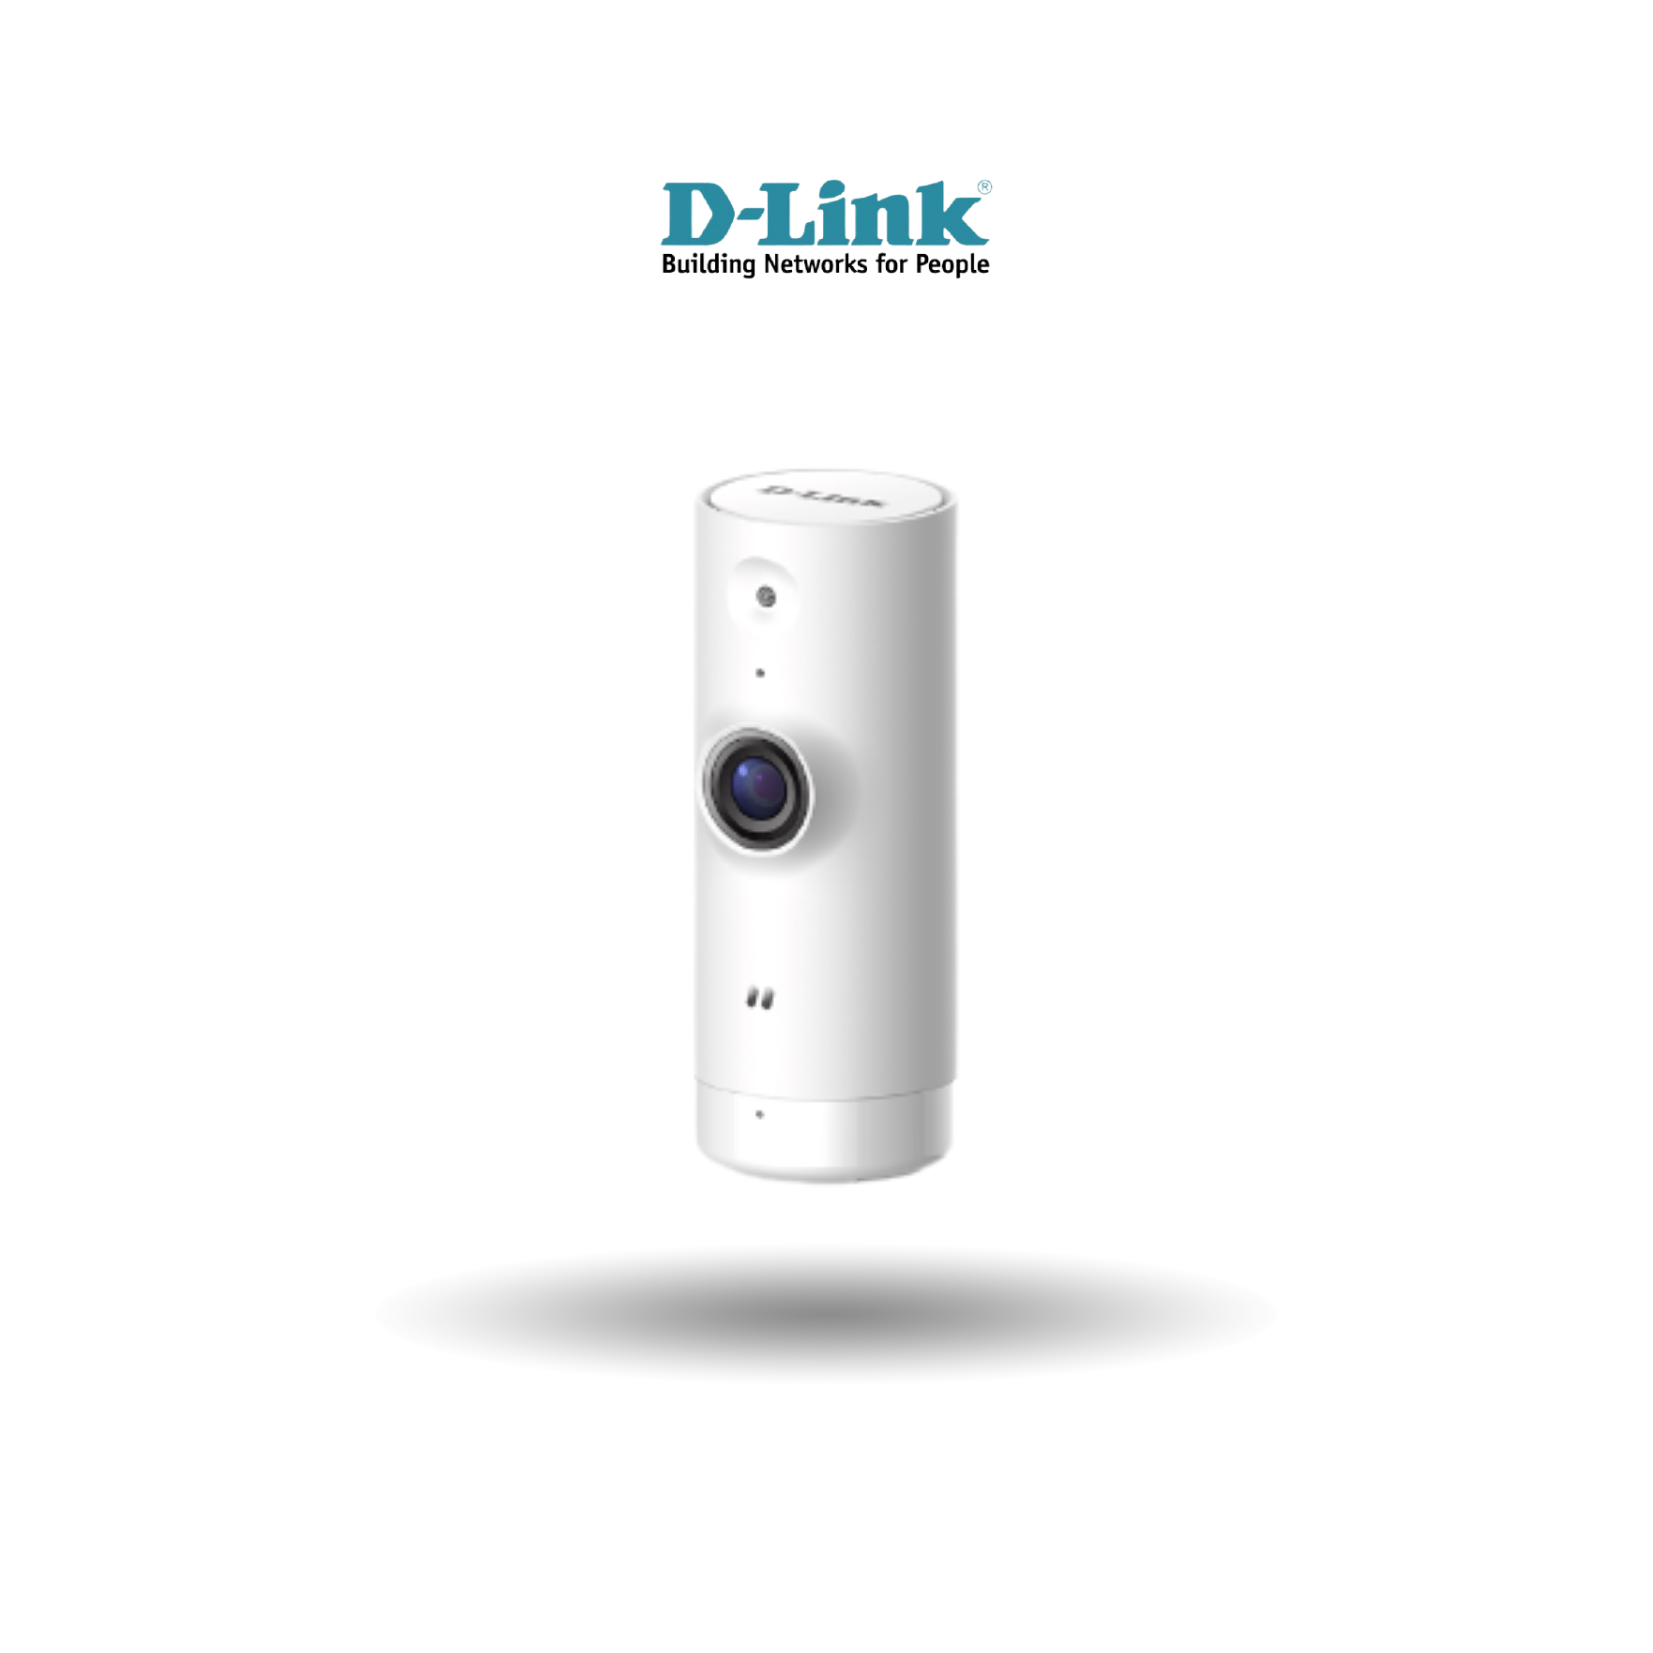 D-Link HD 120' Degree Mini Wifi Ip Camera 120 Degree Wide Angle Lens Control With Apps & Voice 720P HD Camera